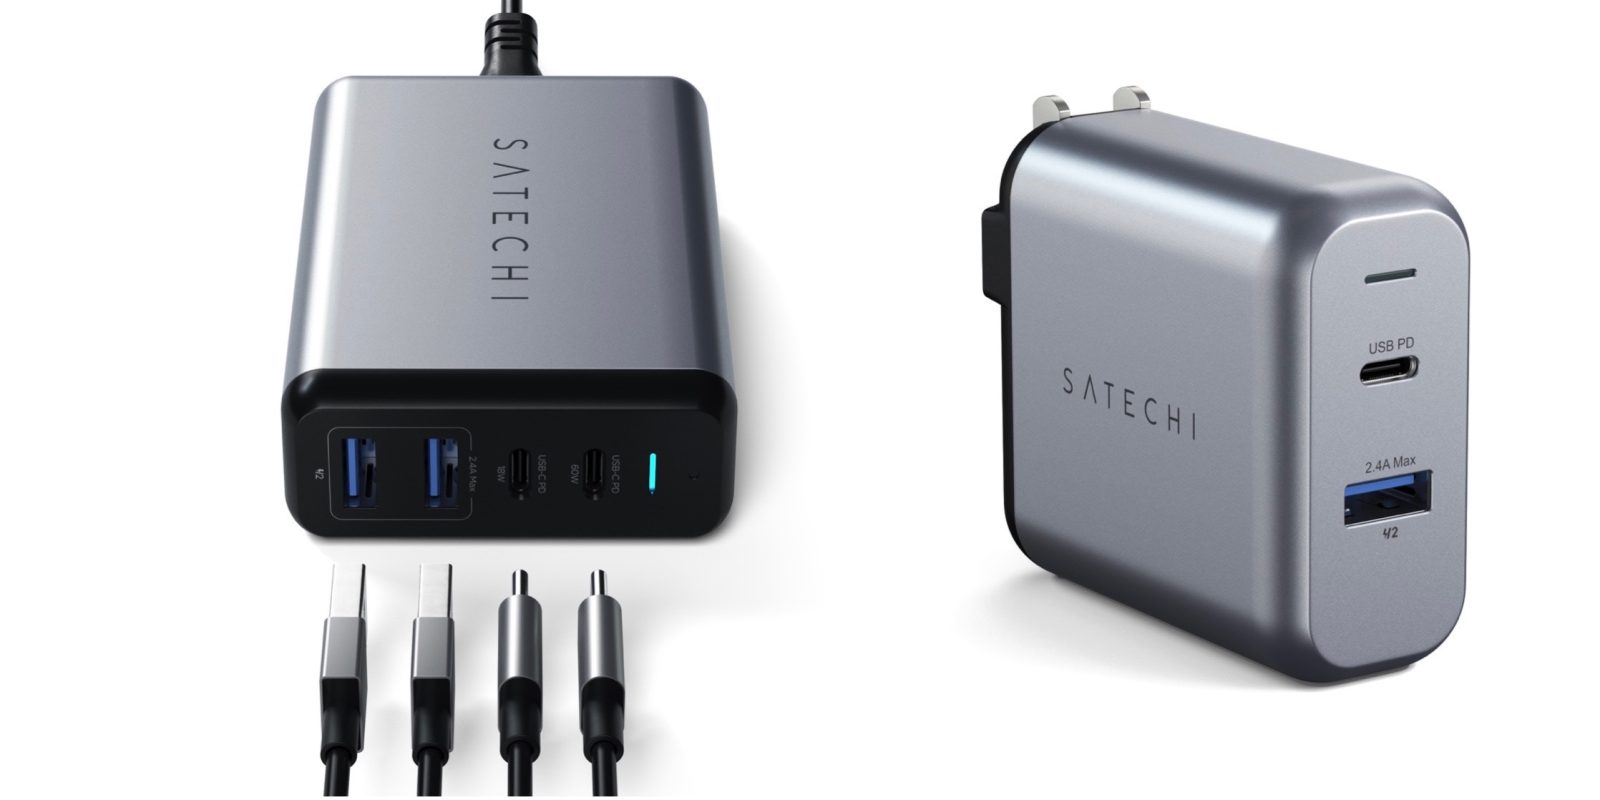 politik bestyrelse Svække Satechi launches 30W and 75W USB-C chargers, powers MacBook, iPad, and  iPhone simultaneously - 9to5Mac